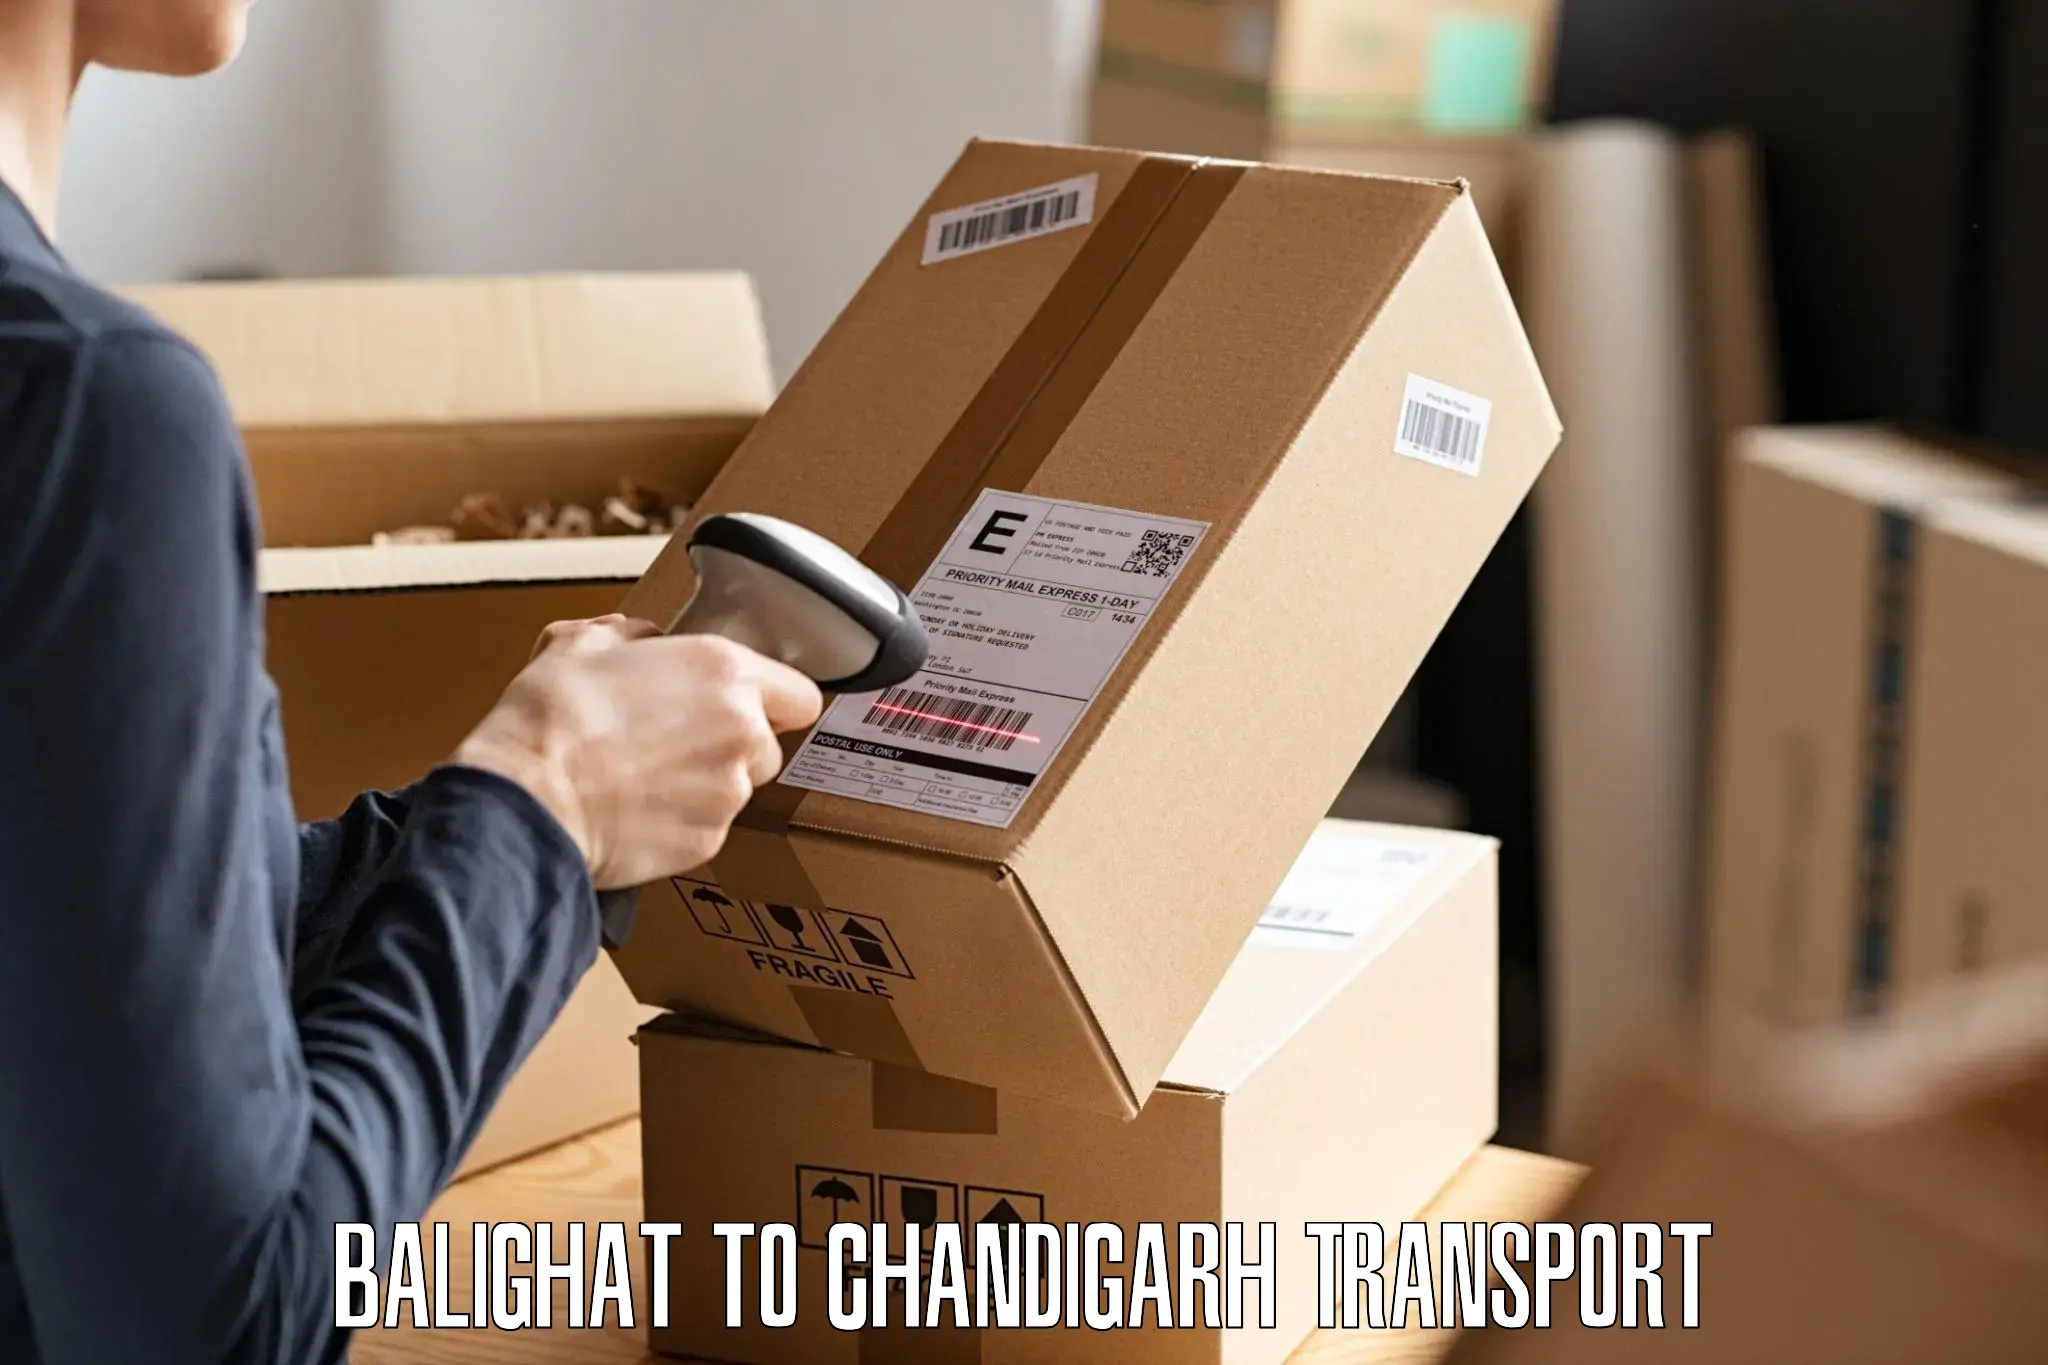 Cycle transportation service Balighat to Chandigarh